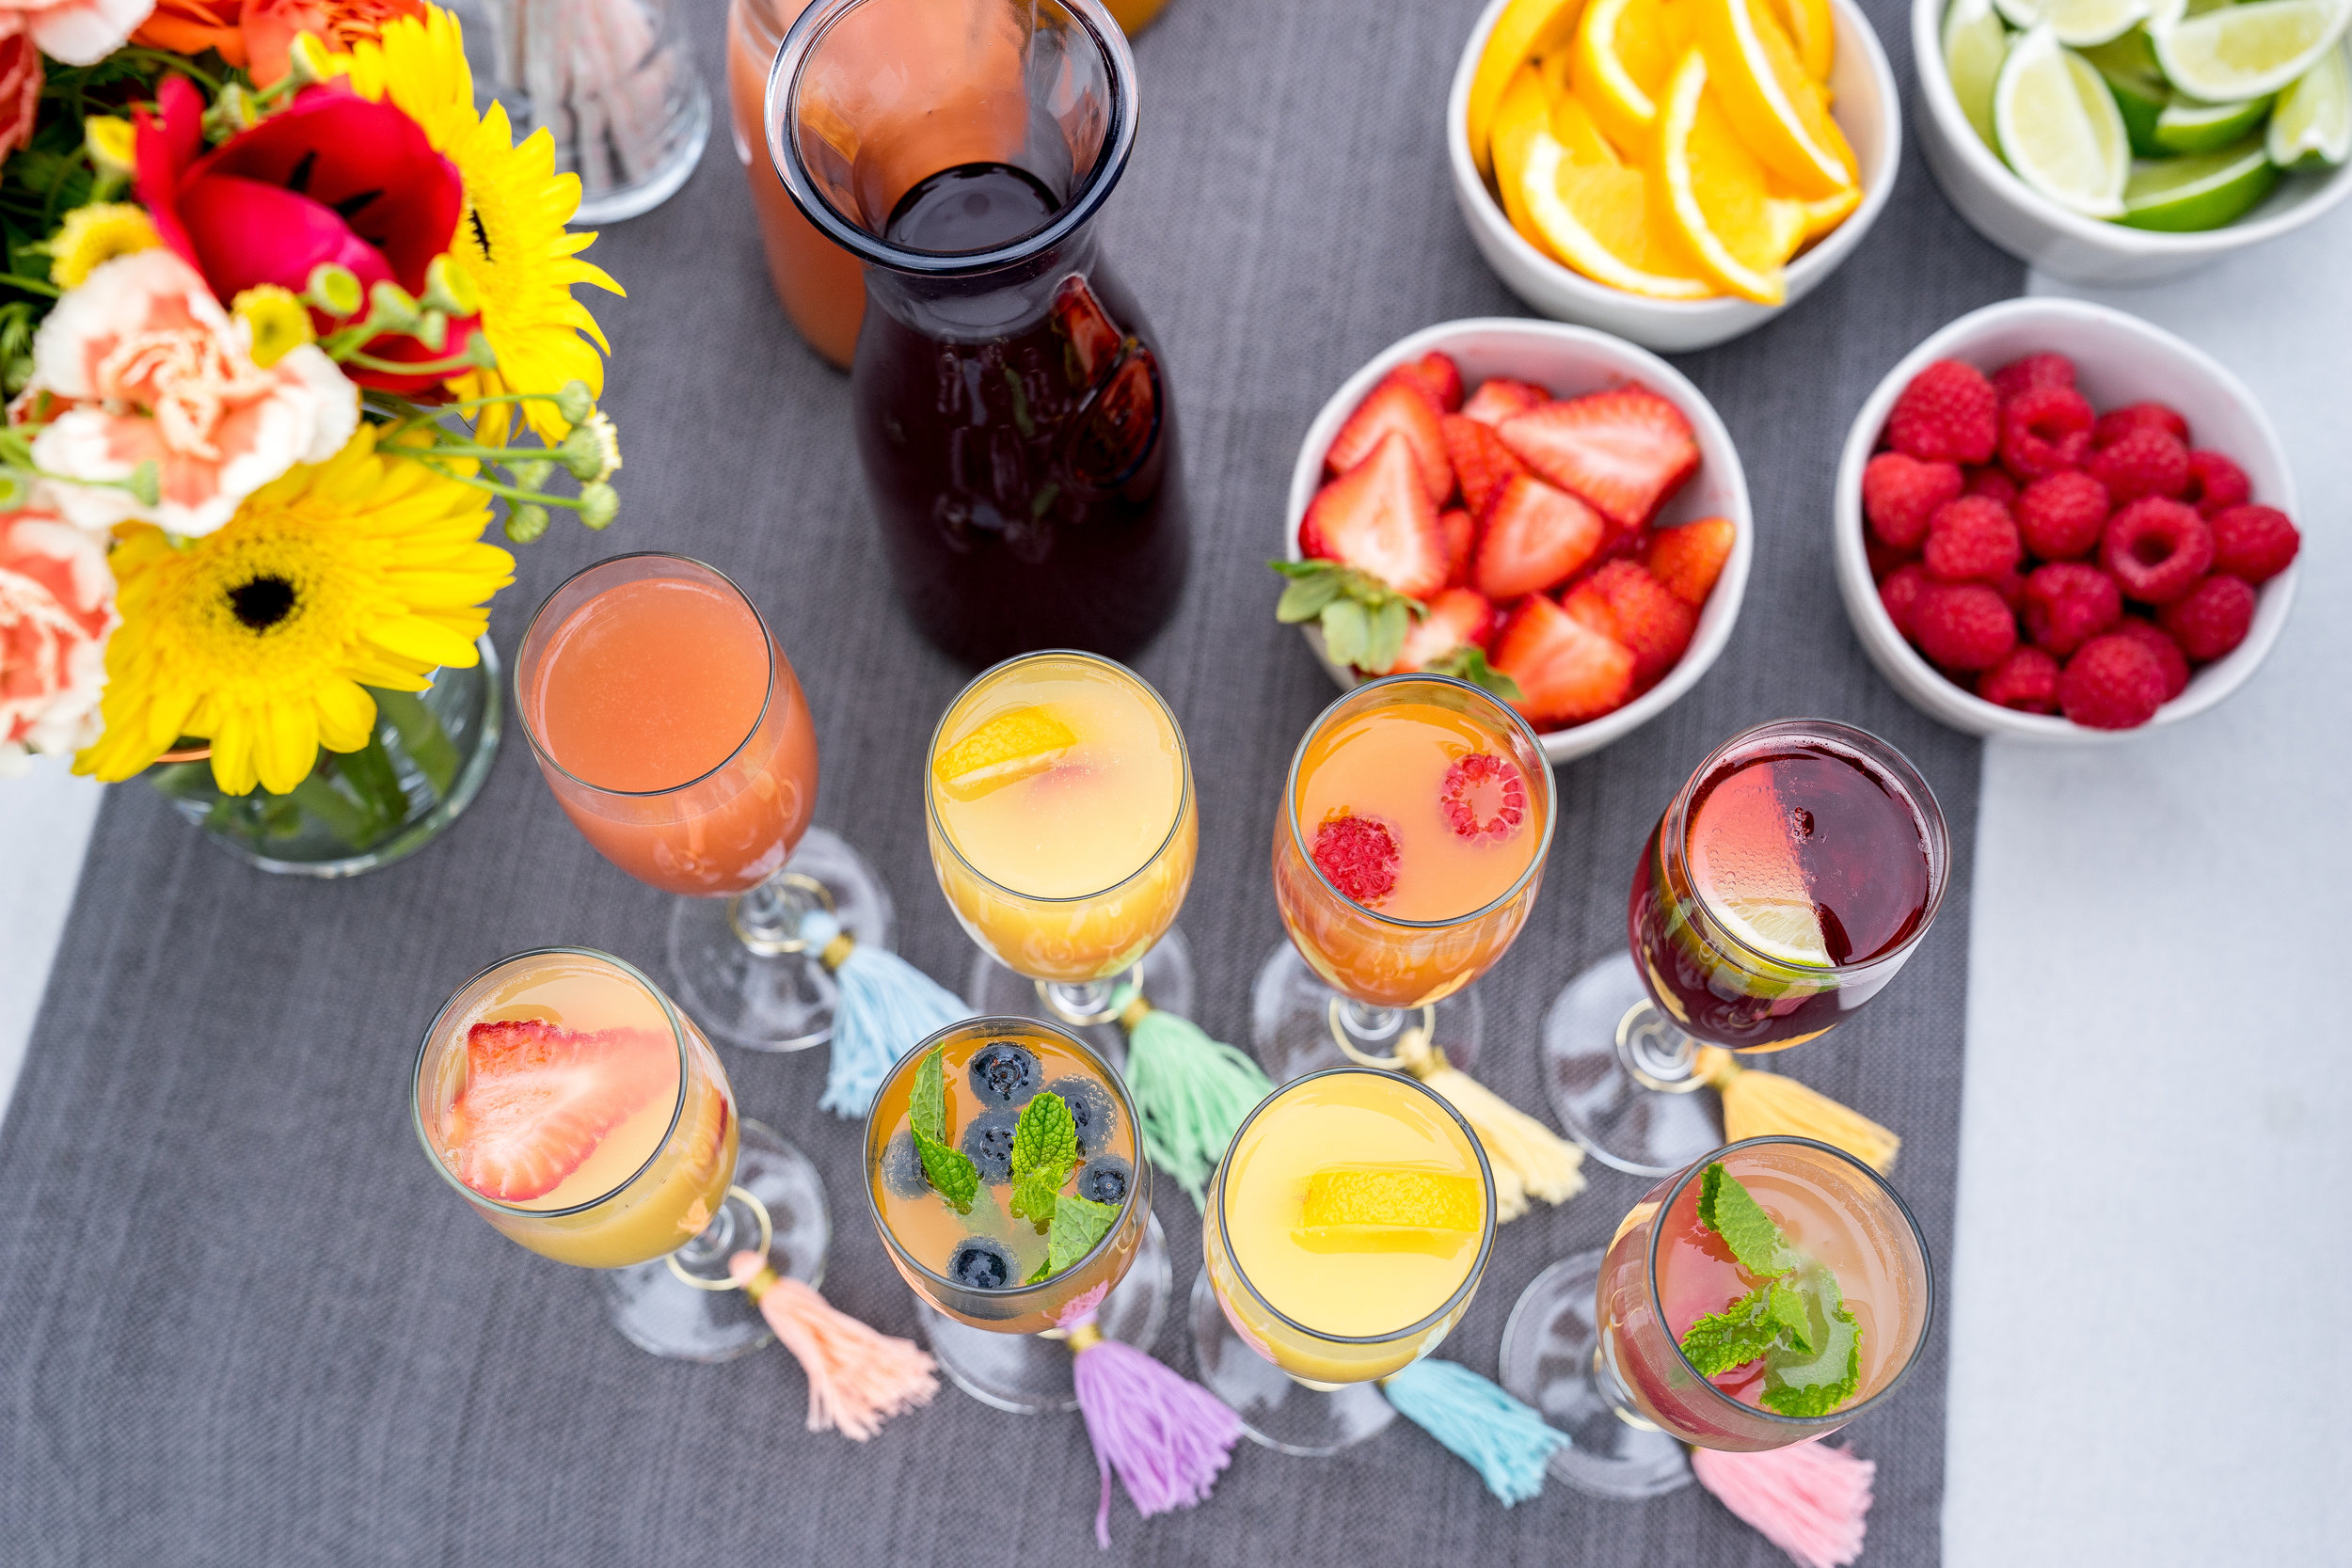 Let's Brunch!' Mimosa Bar Kit 14ct - The Ultimate Party and Rental Store